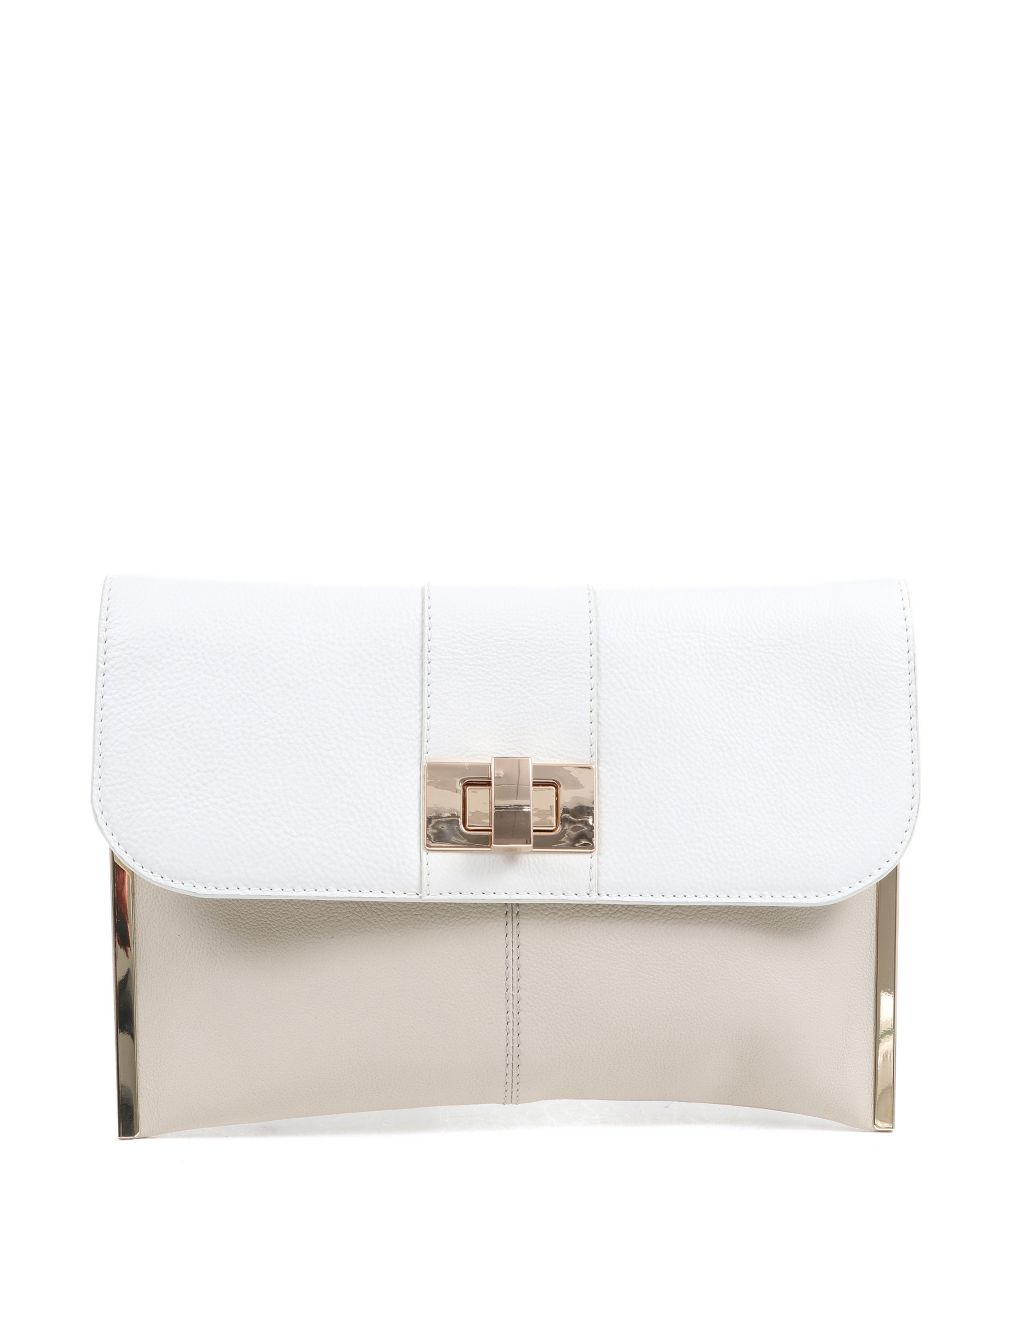 Leather Clutch Bag image 2